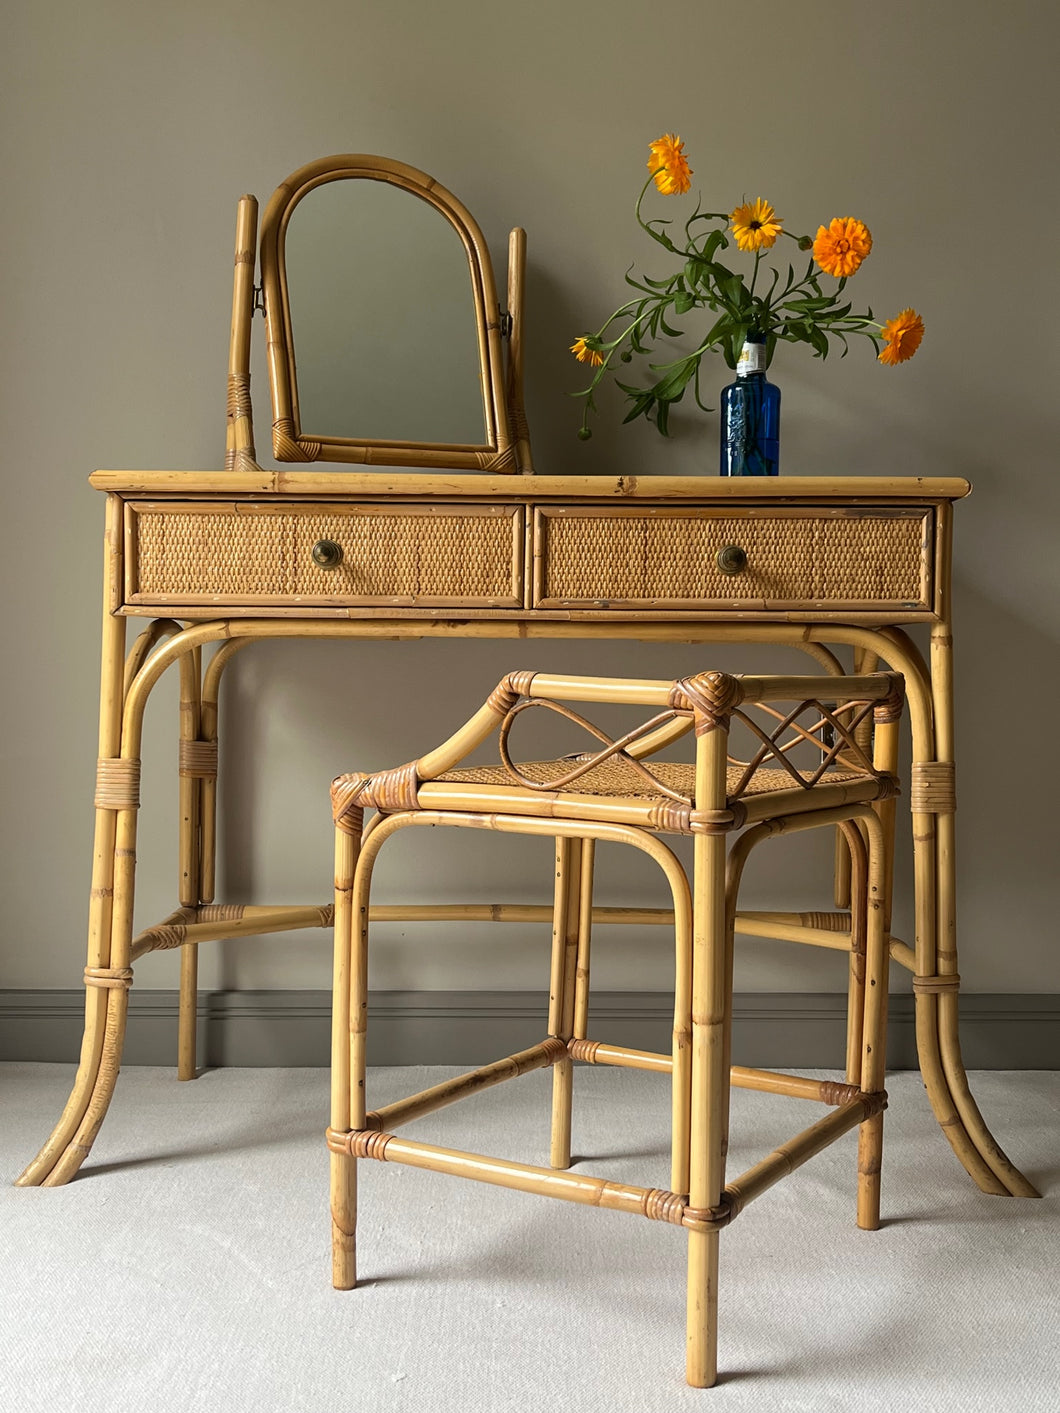 Bamboo and Rattan Dressing Table Set.